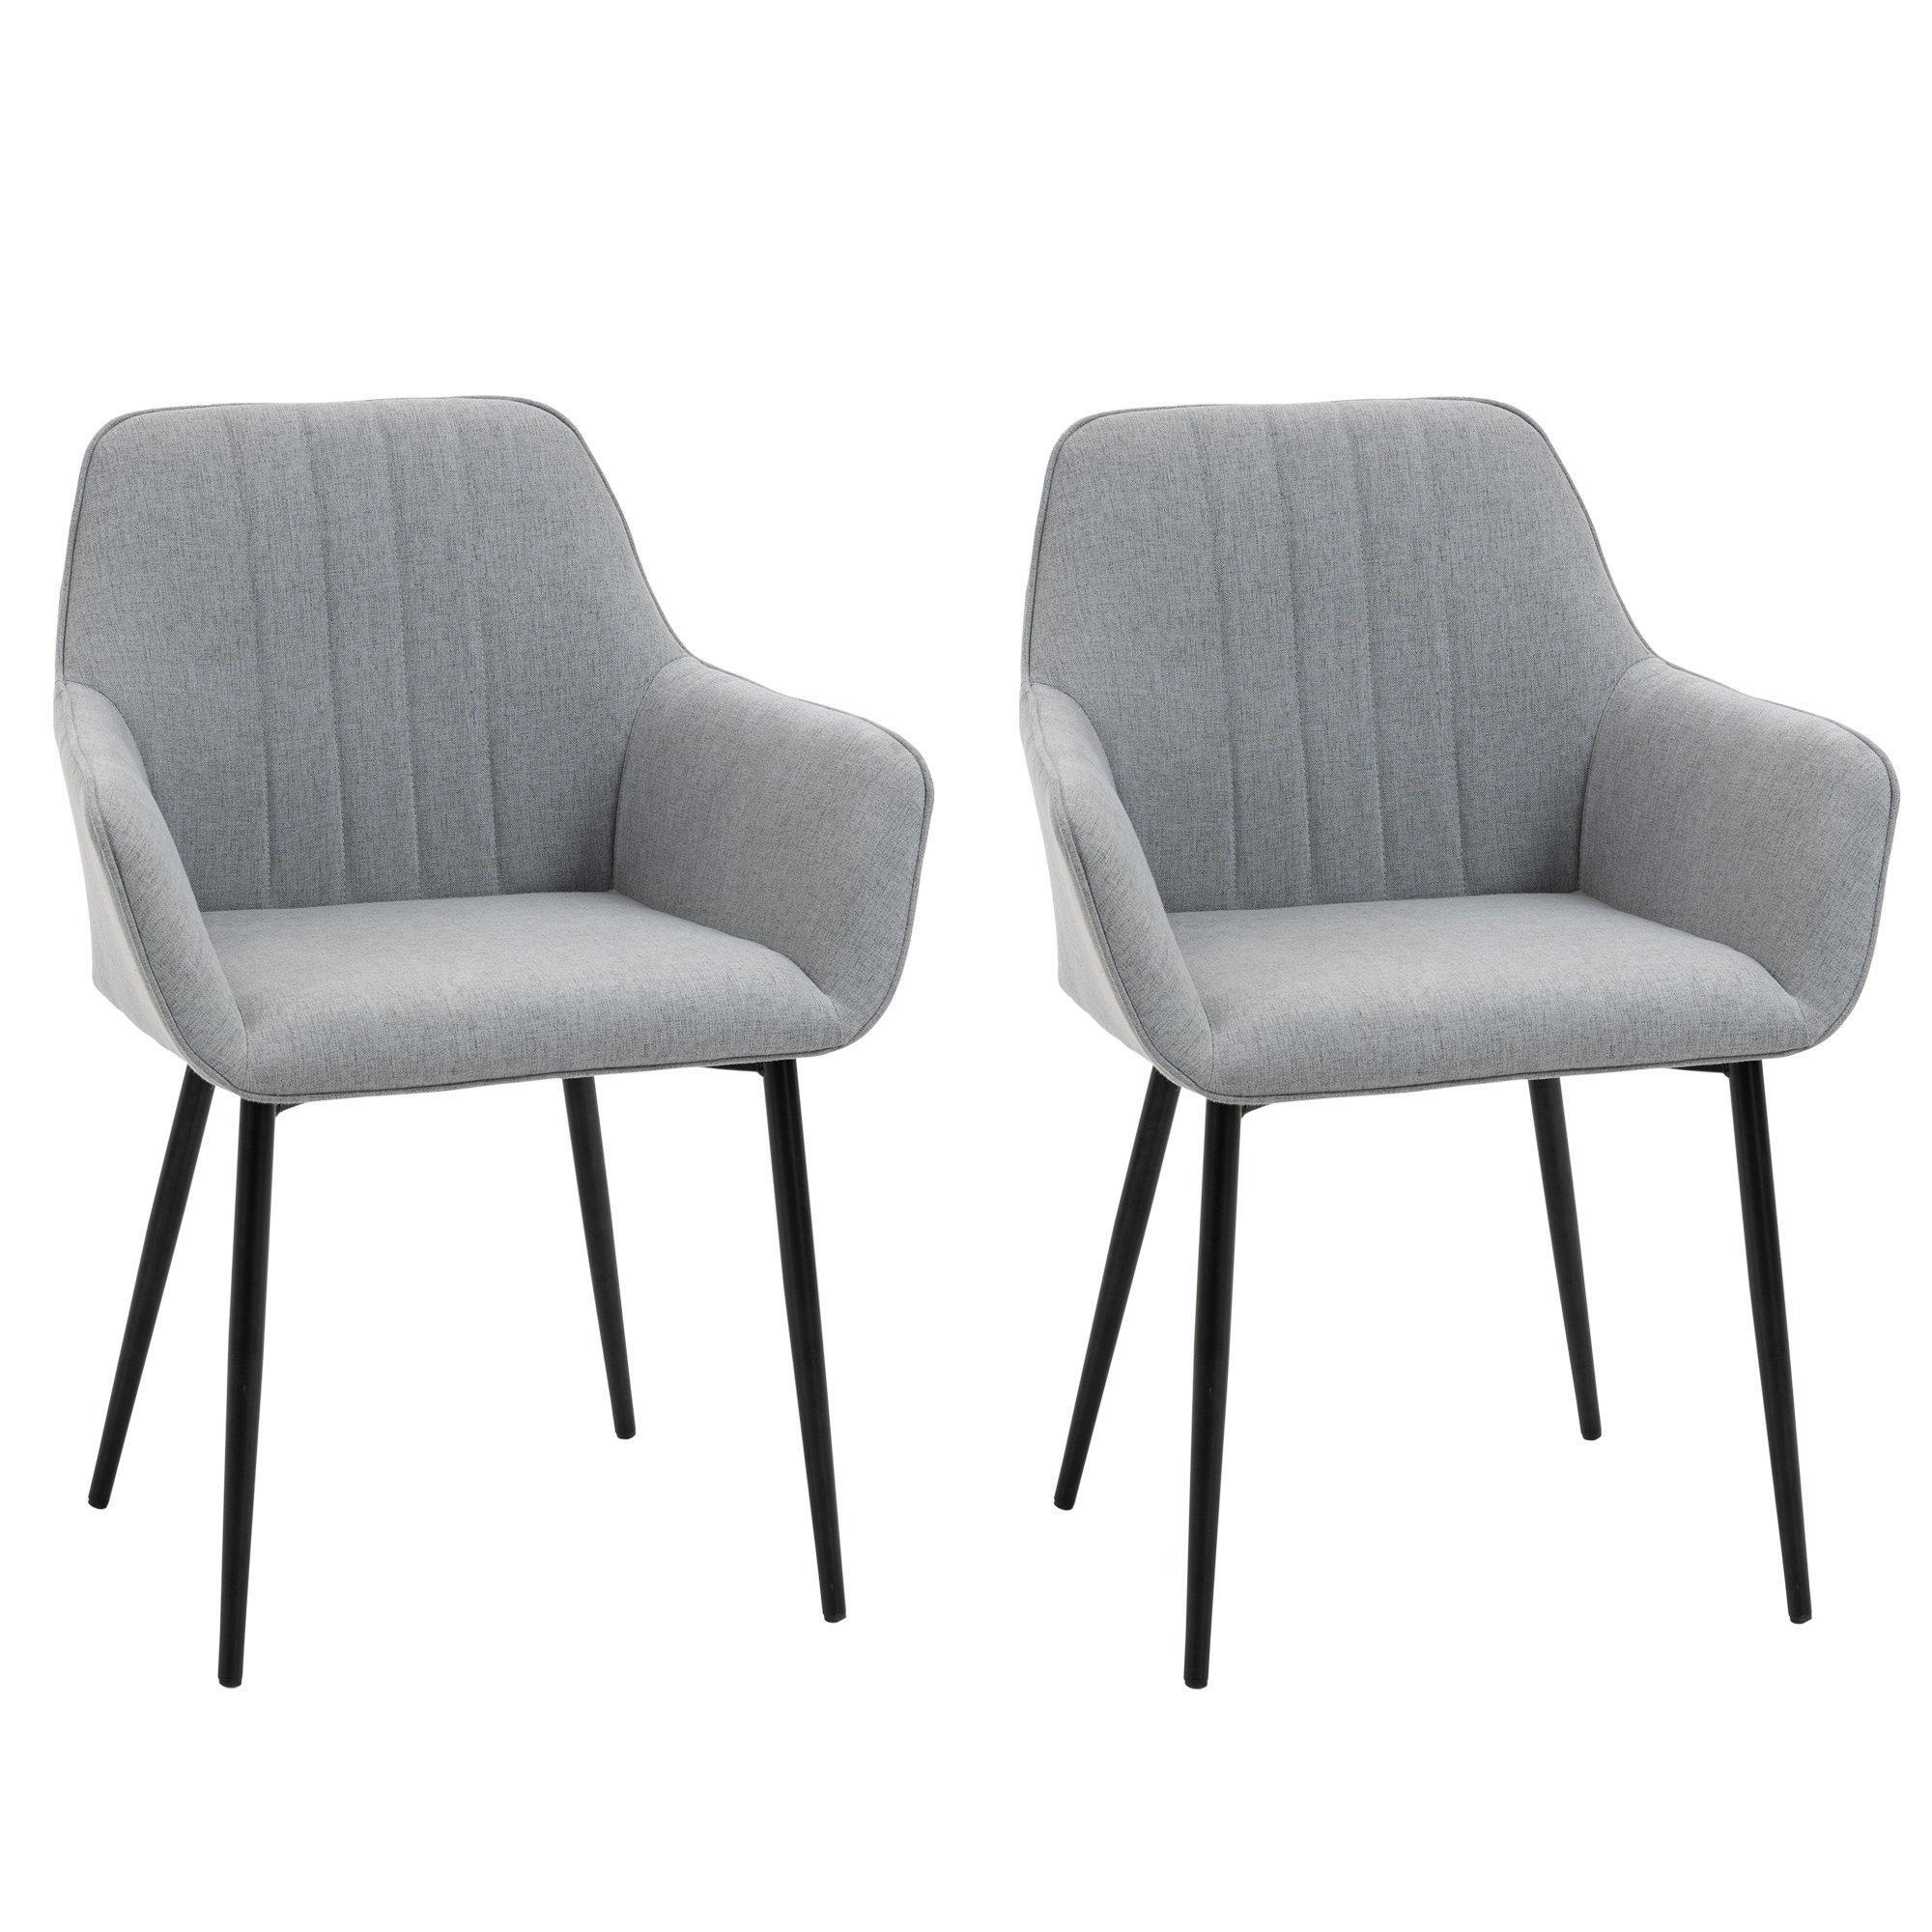 Dining Chairs Set of 2 Linen Fabric Accent Chairs Metal Legs - image 1